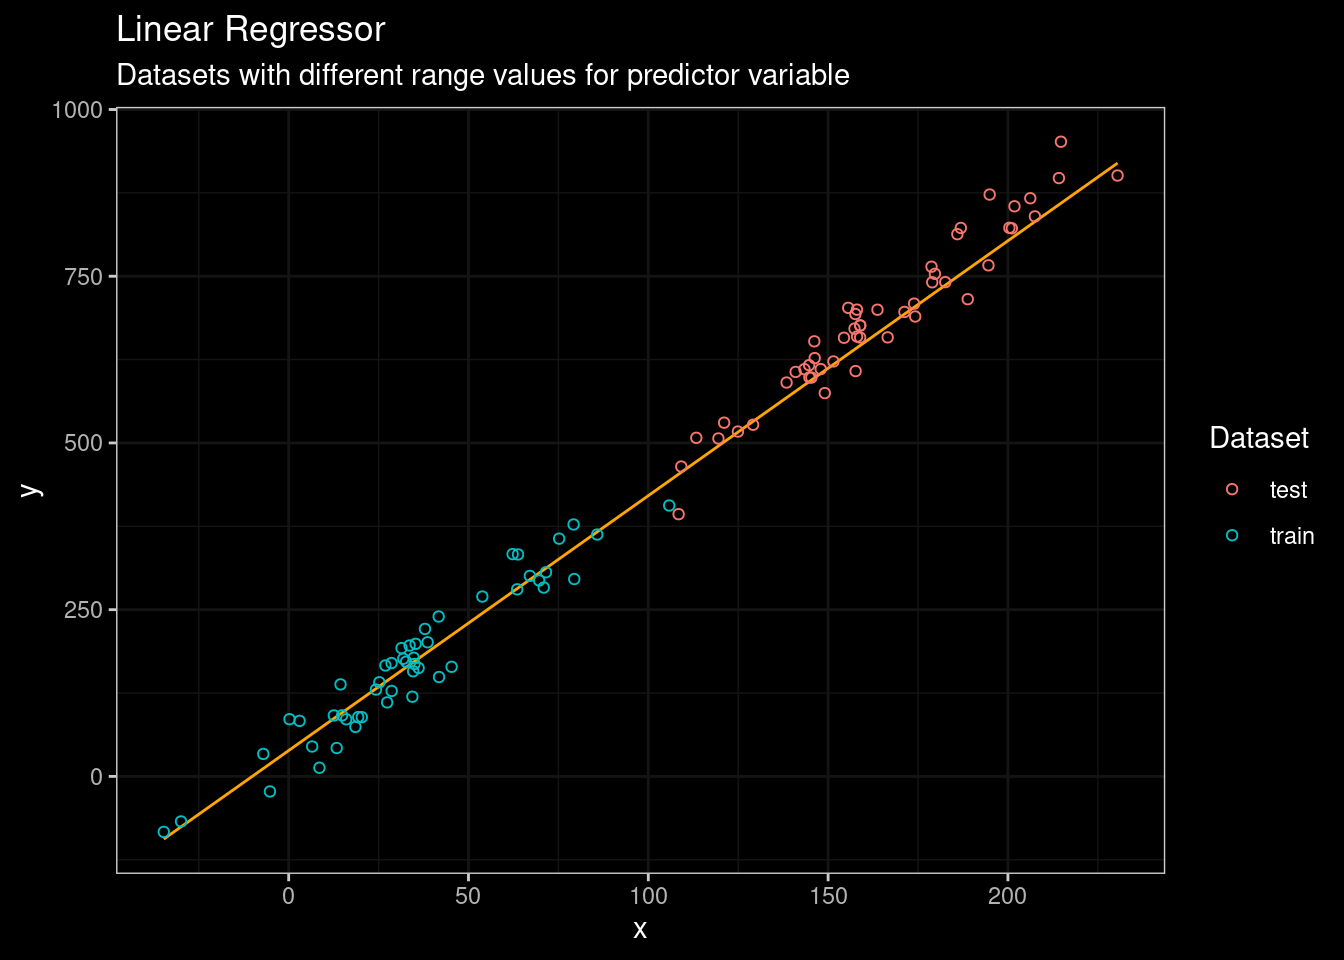 Linear Regression results